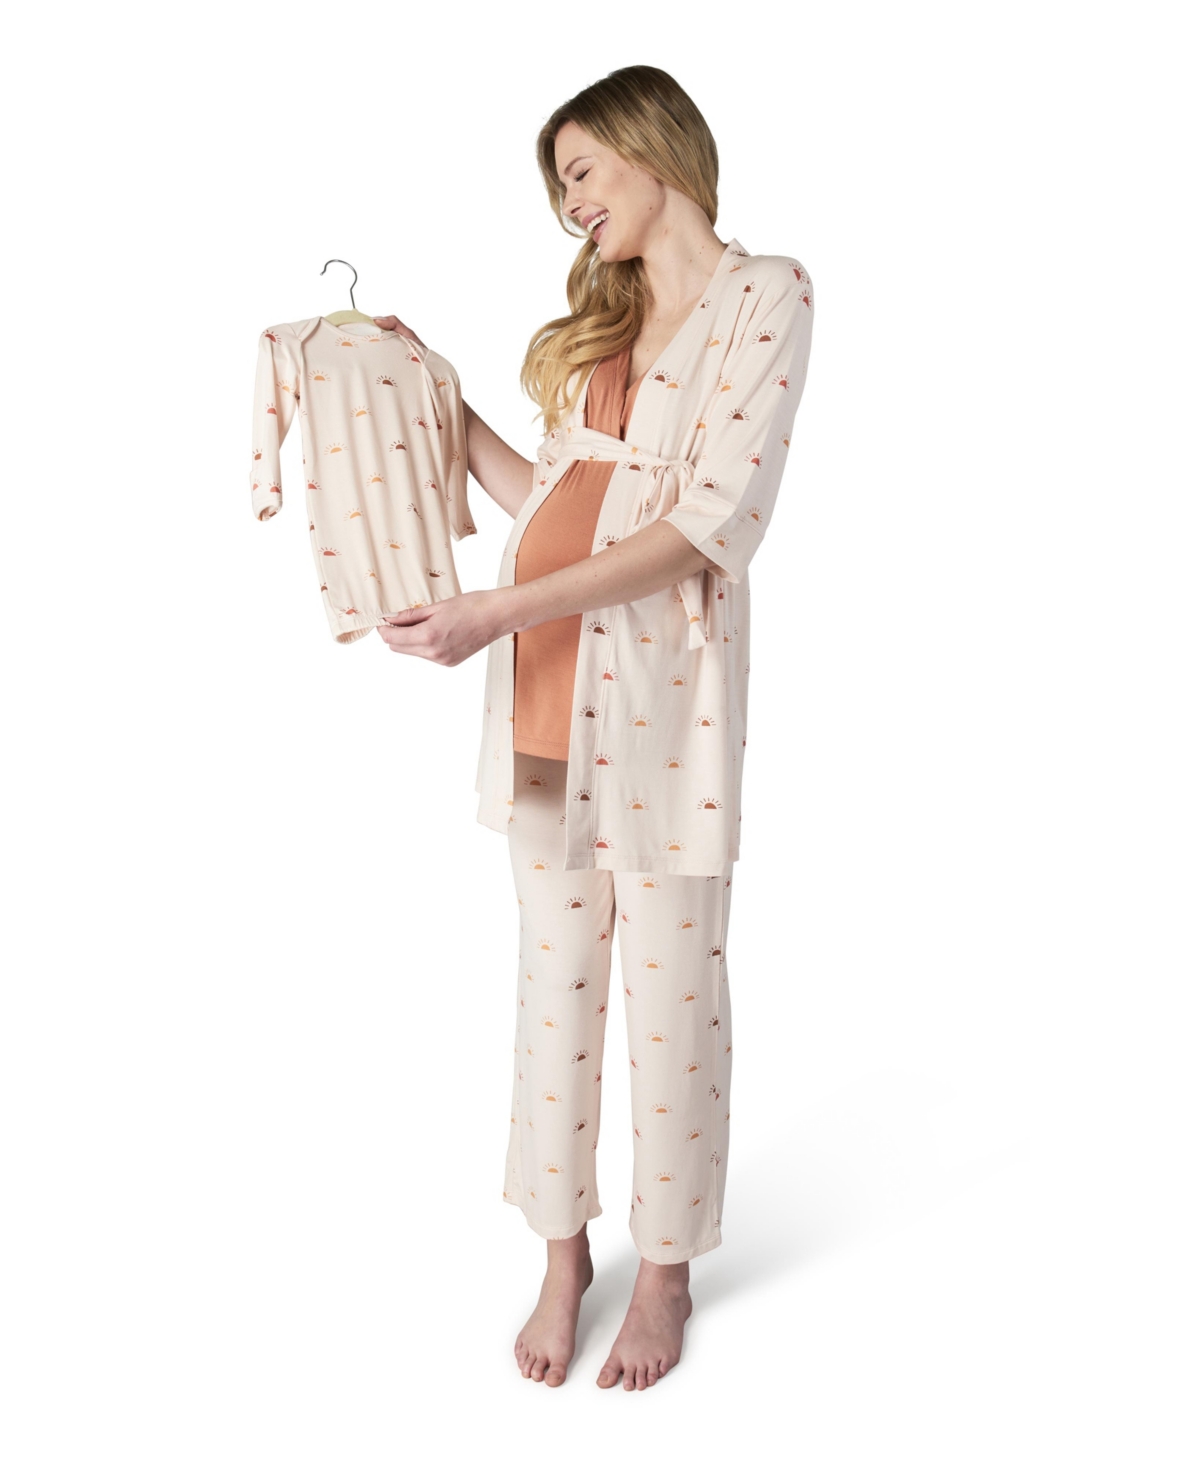 Everly Grey Women's  Analise During & After 5-piece Maternity/nursing Sleep Set In Sunrise